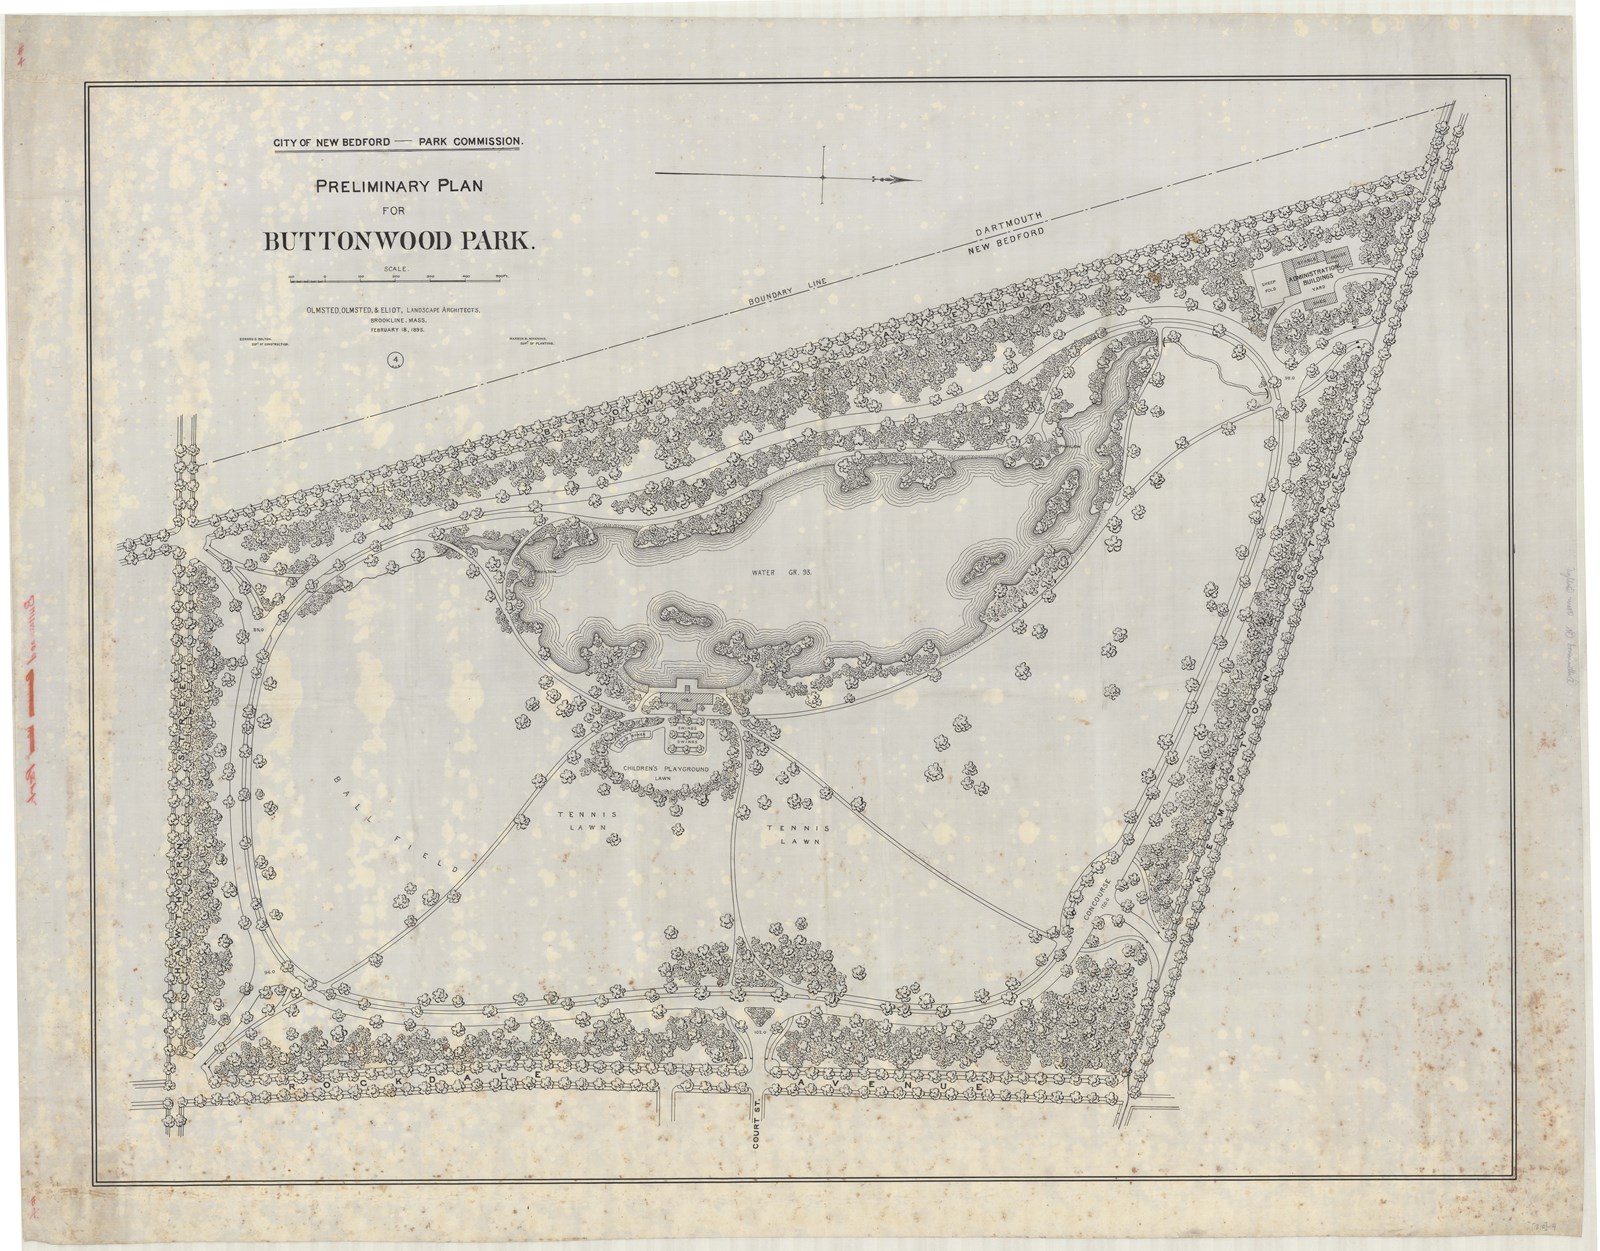 Pencil plan of triangular park with trees around perimeter, body of water and open space in middle 